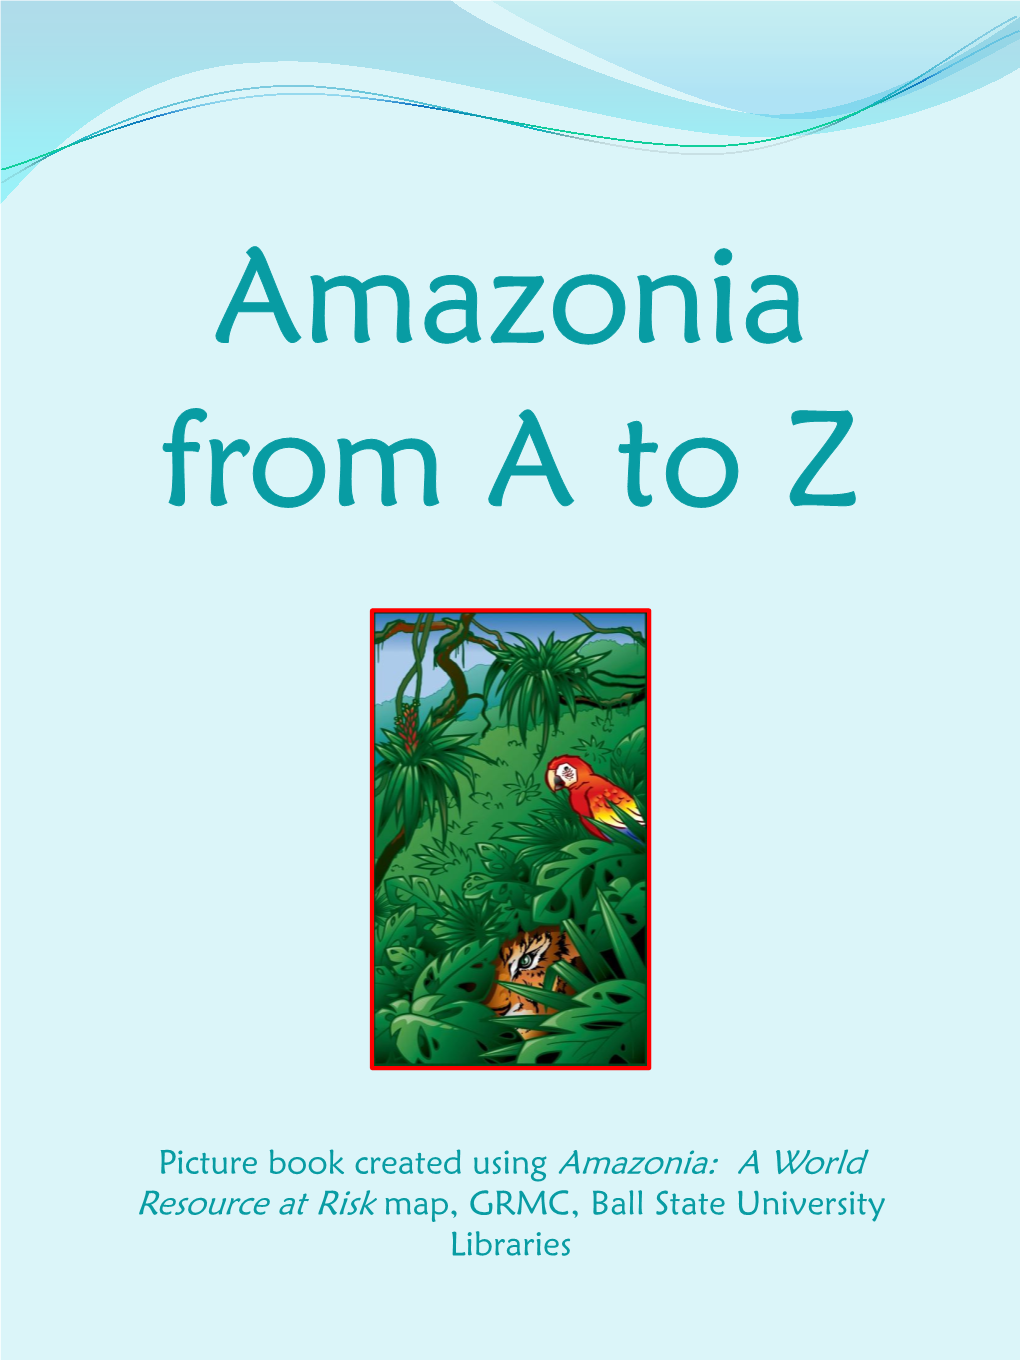 Picture Book Created Using Amazonia: a World Resource at Risk Map, GRMC, Ball State University Libraries Is for the Amazon Basin, Or Amazonia